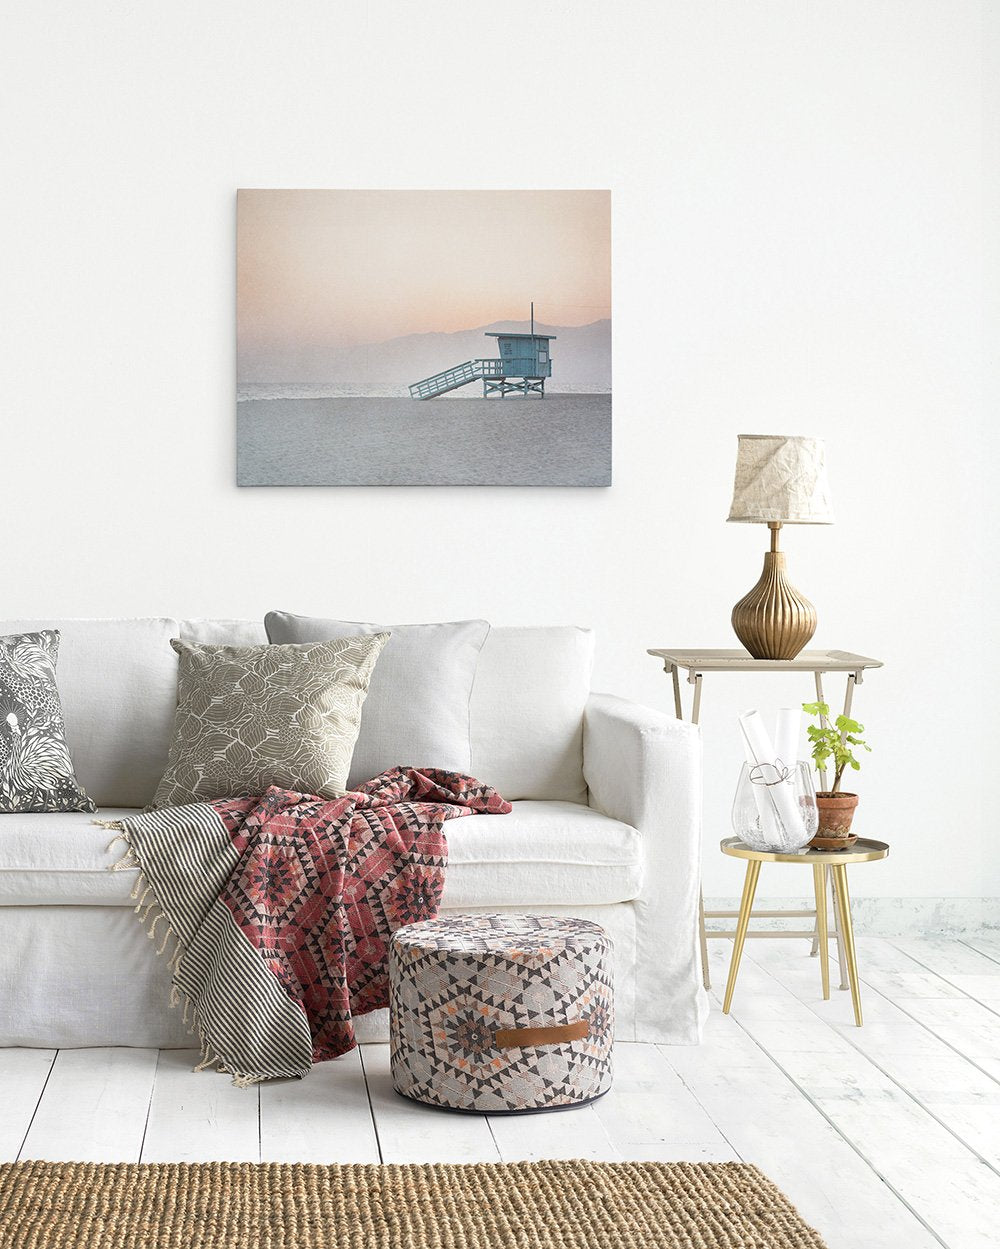 A cozy living room featuring a white sofa with decorative pillows, a woven pouf, a side table with a lamp and plant, and Offley Green&#39;s Pink Coastal Wall Art, &#39;Lifeguard Tower&#39; print of Venice Santa Monica beach at sunset on the wall.